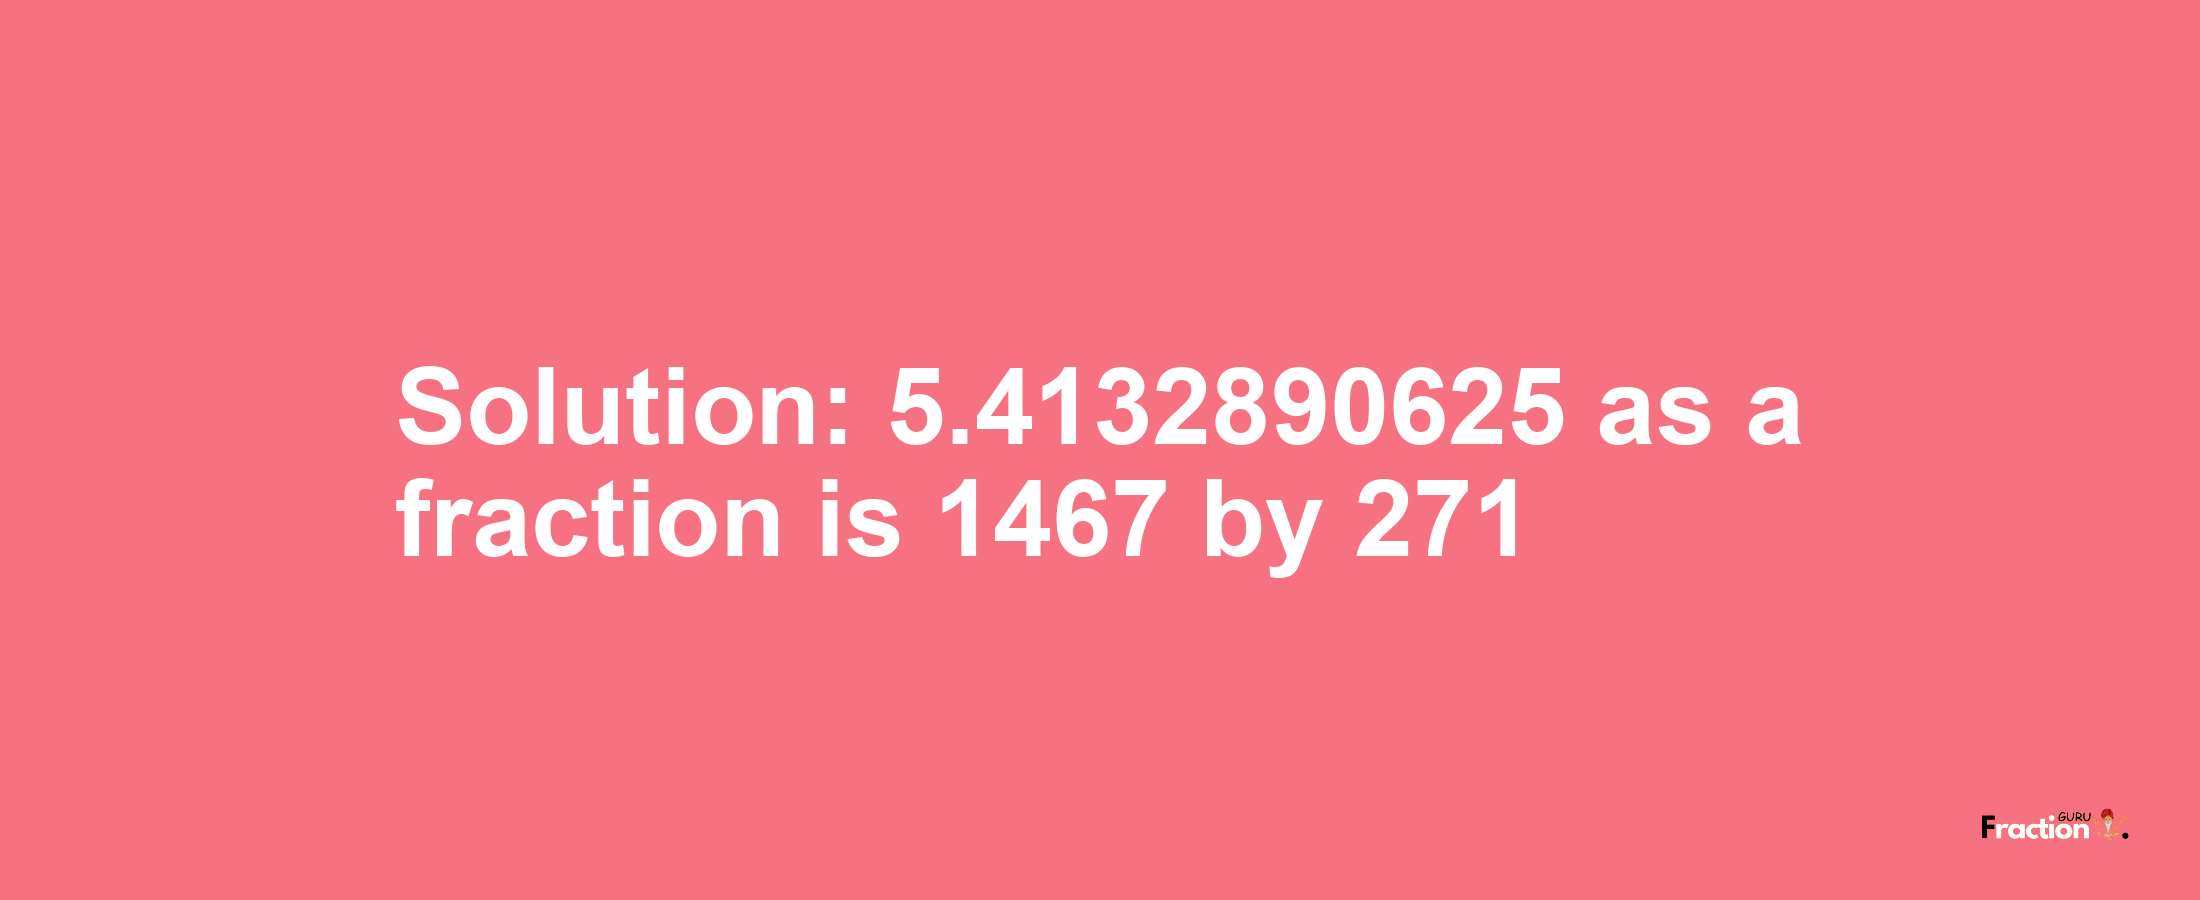 Solution:5.4132890625 as a fraction is 1467/271